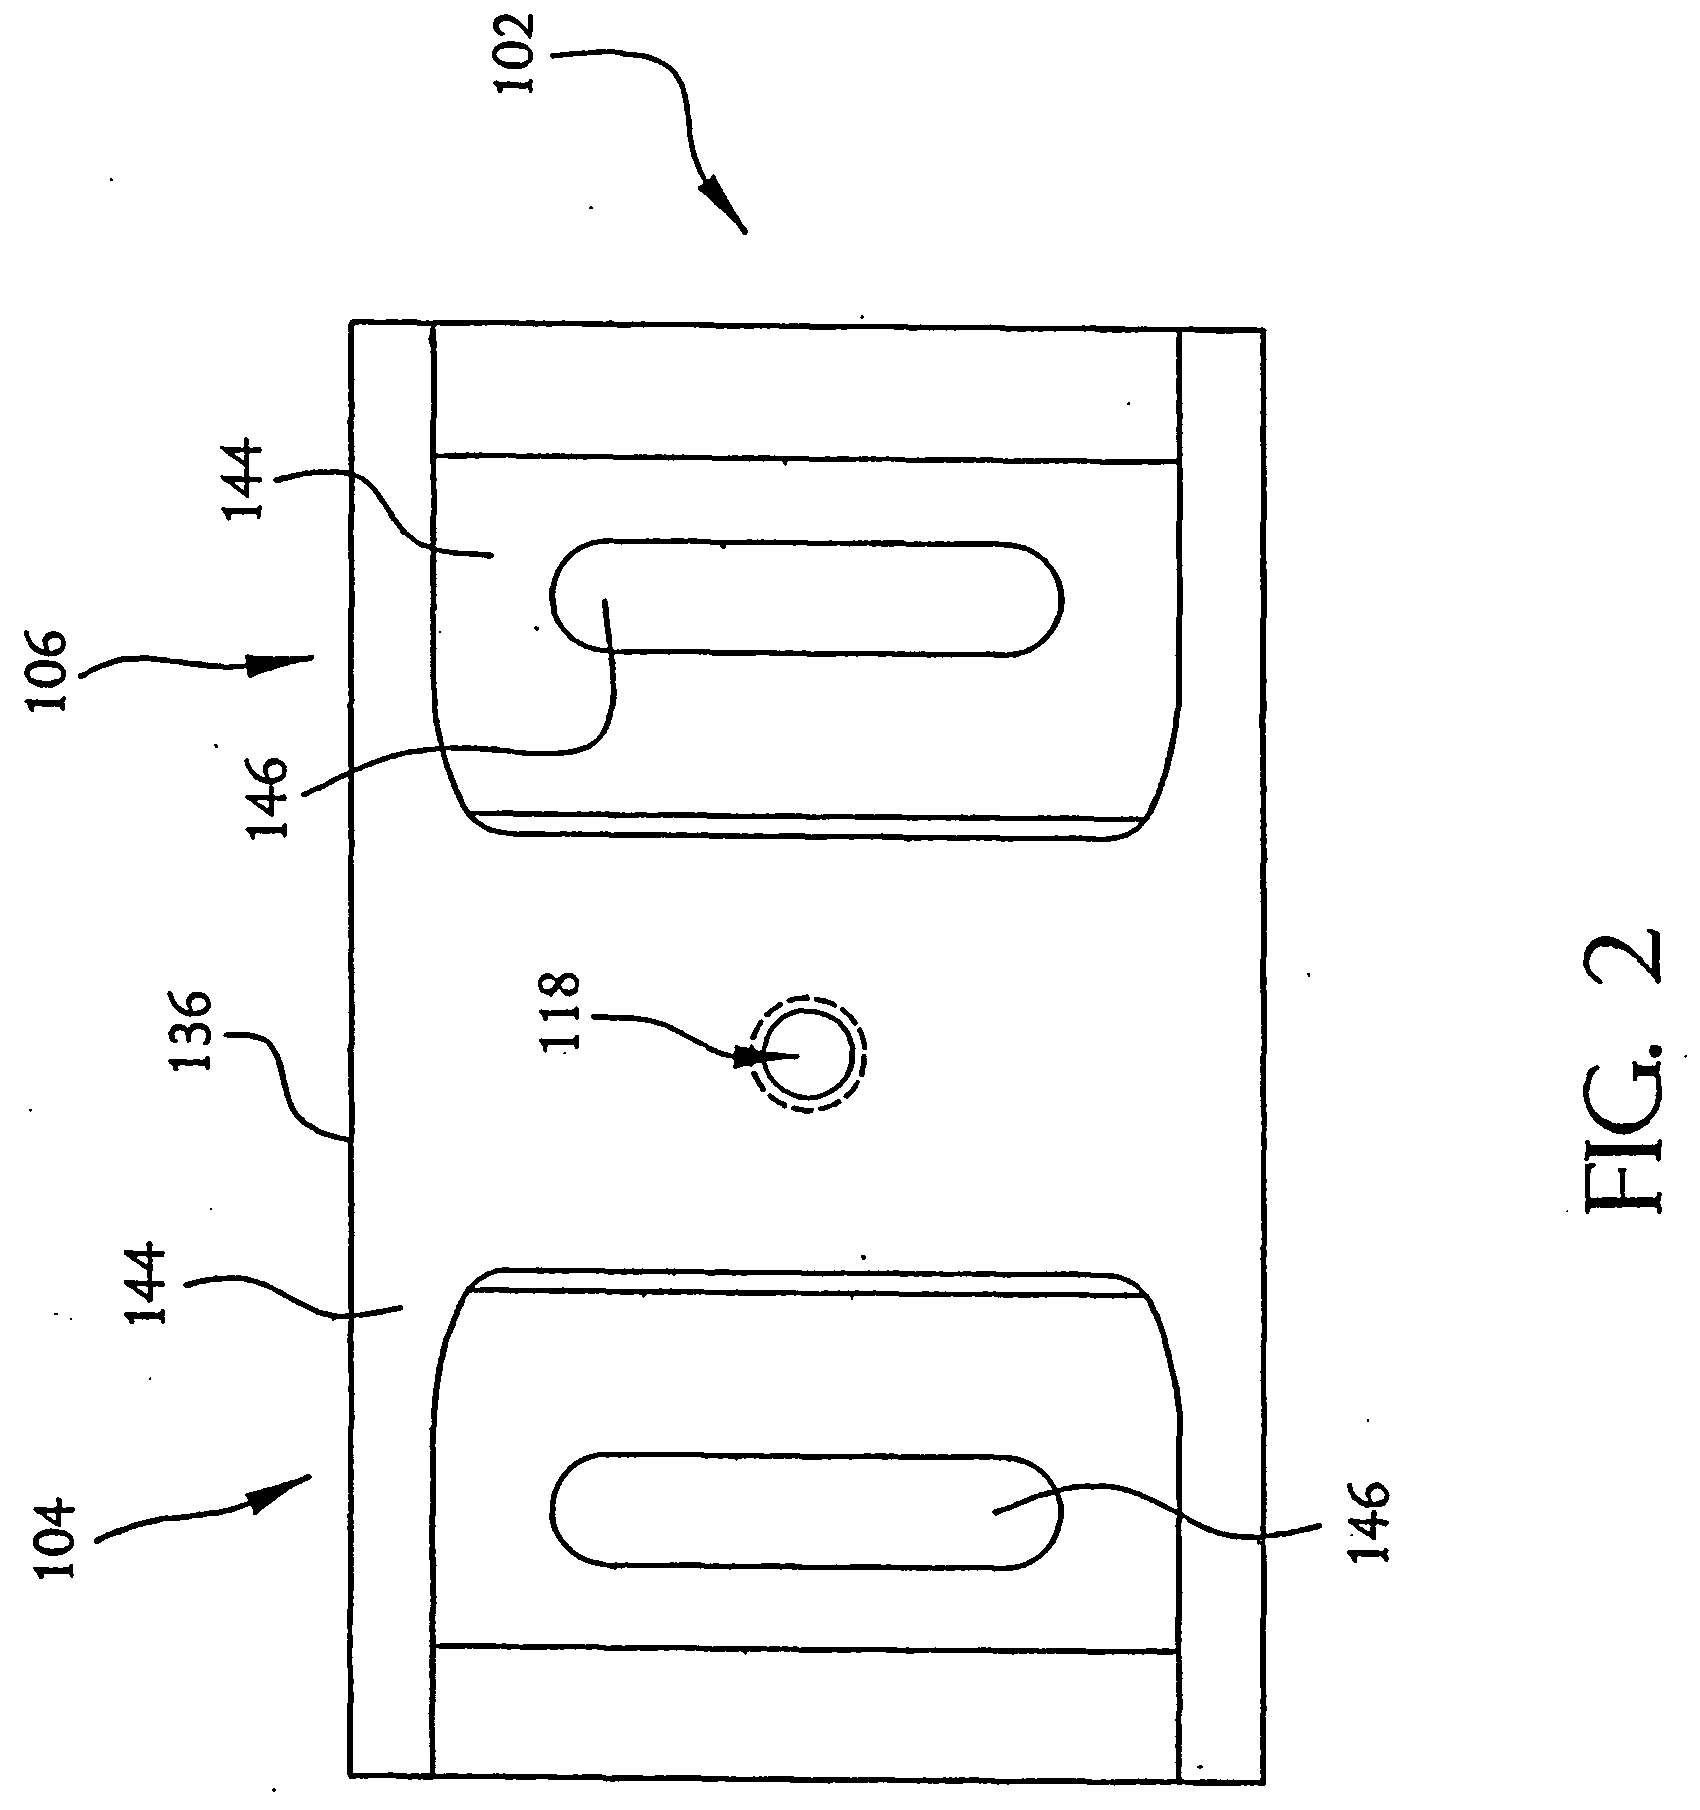 Ultra-fast nucleic acid sequencing device and a method for making and using the same